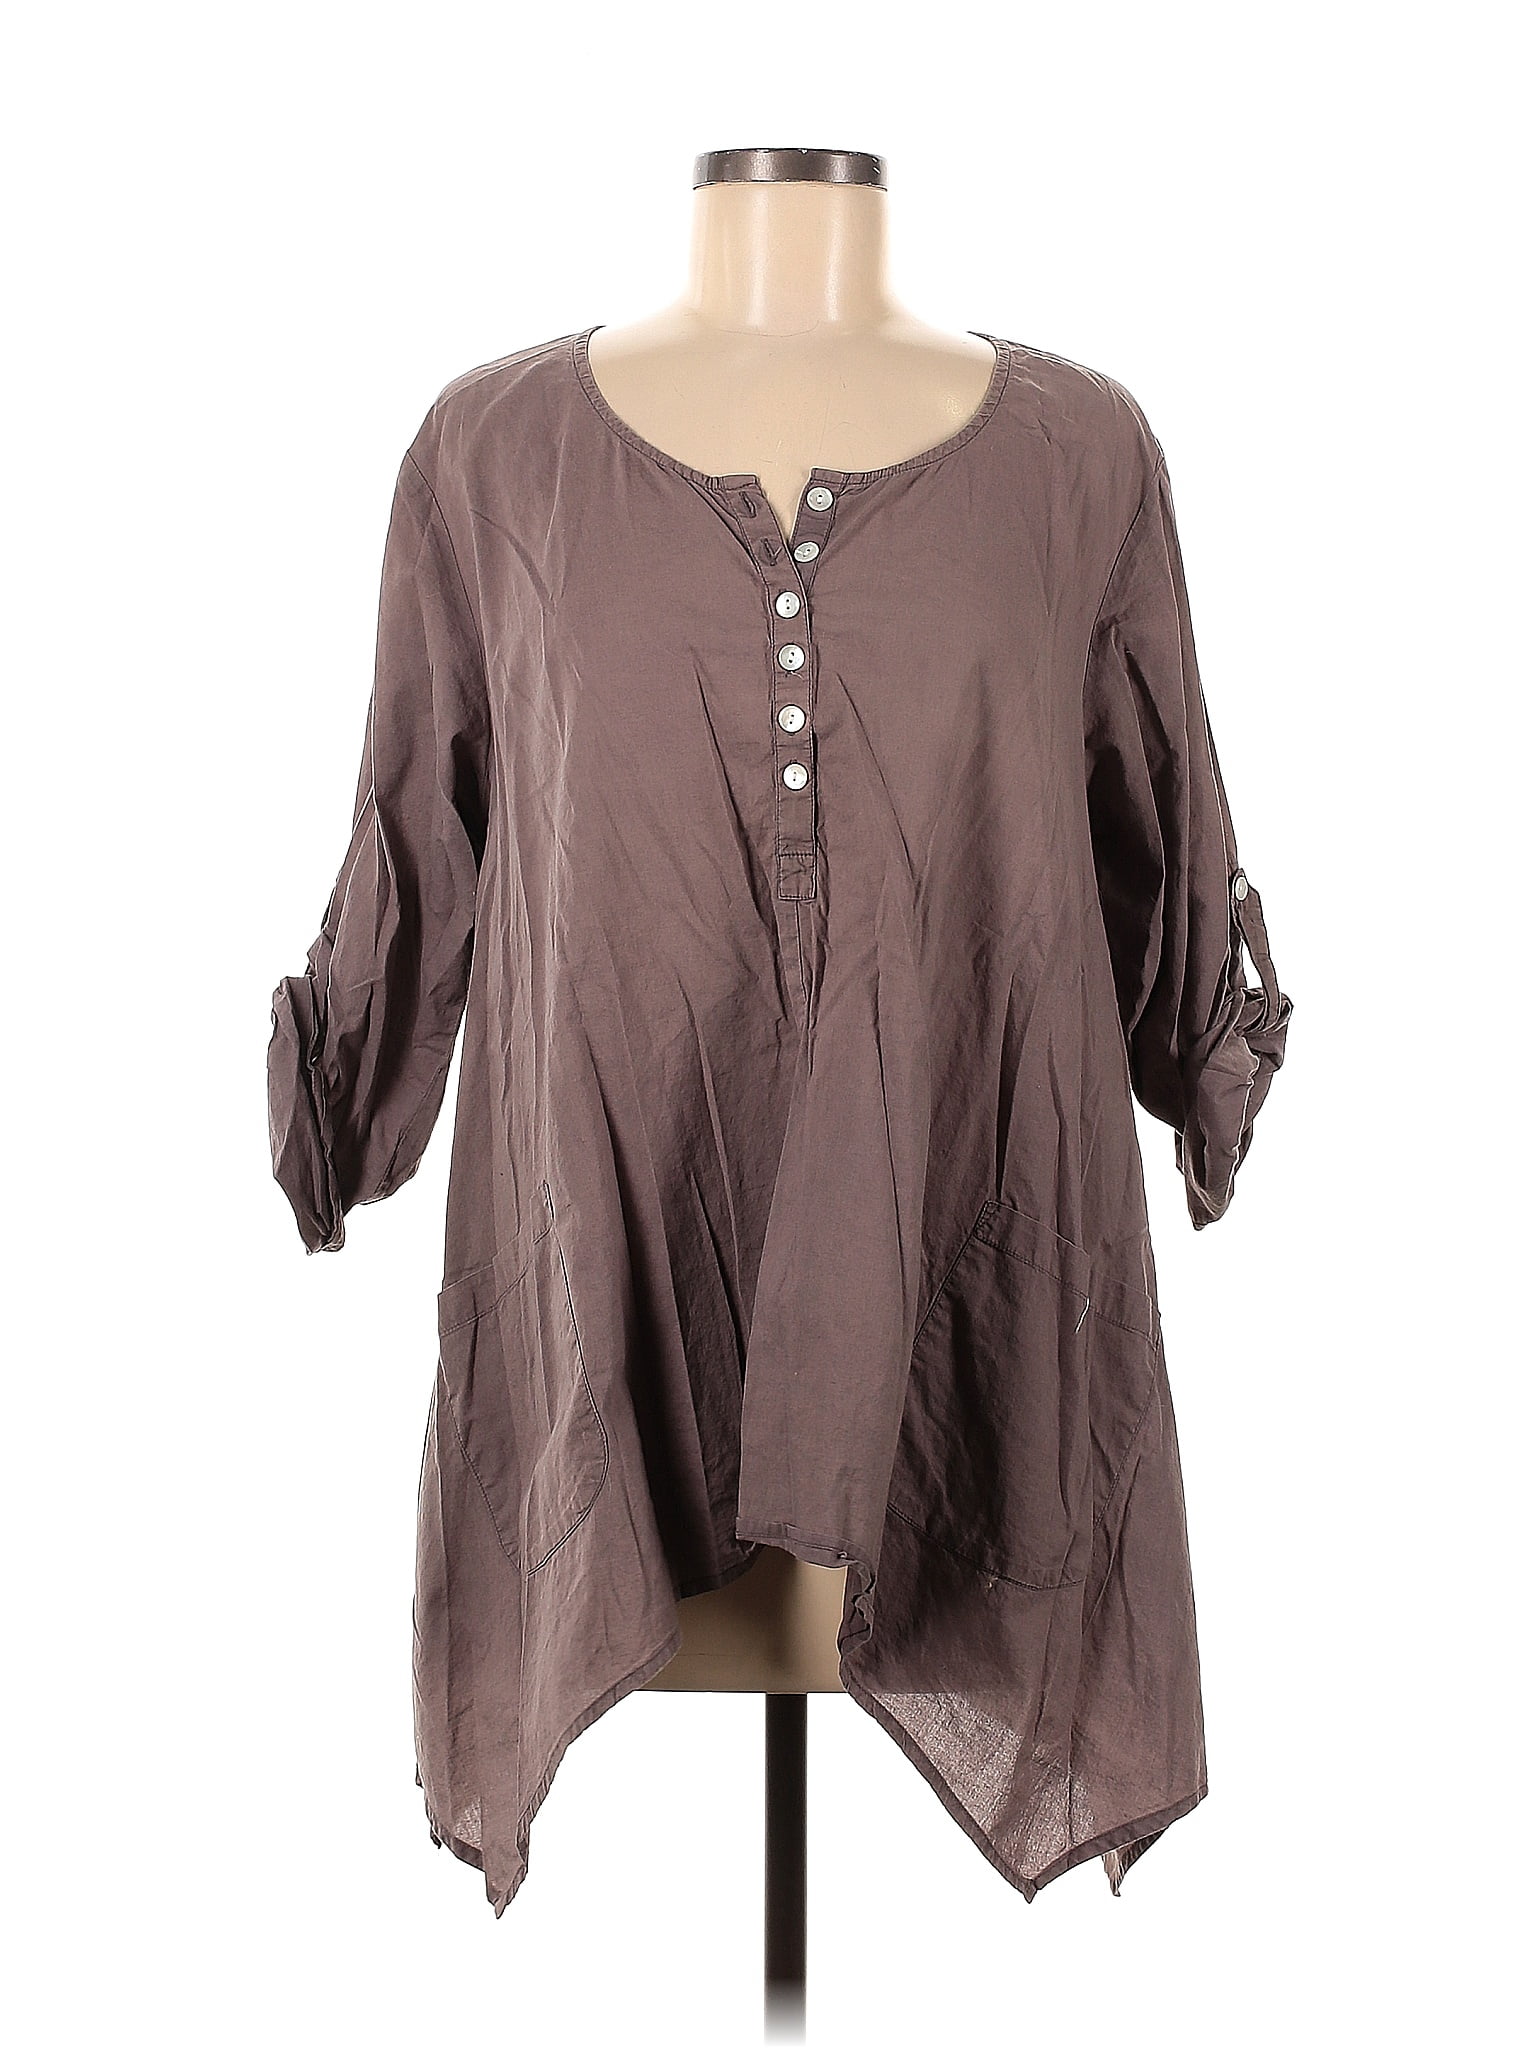 Tulip 100% Cotton Solid Brown 3/4 Sleeve Blouse Size M - 55% off | ThredUp